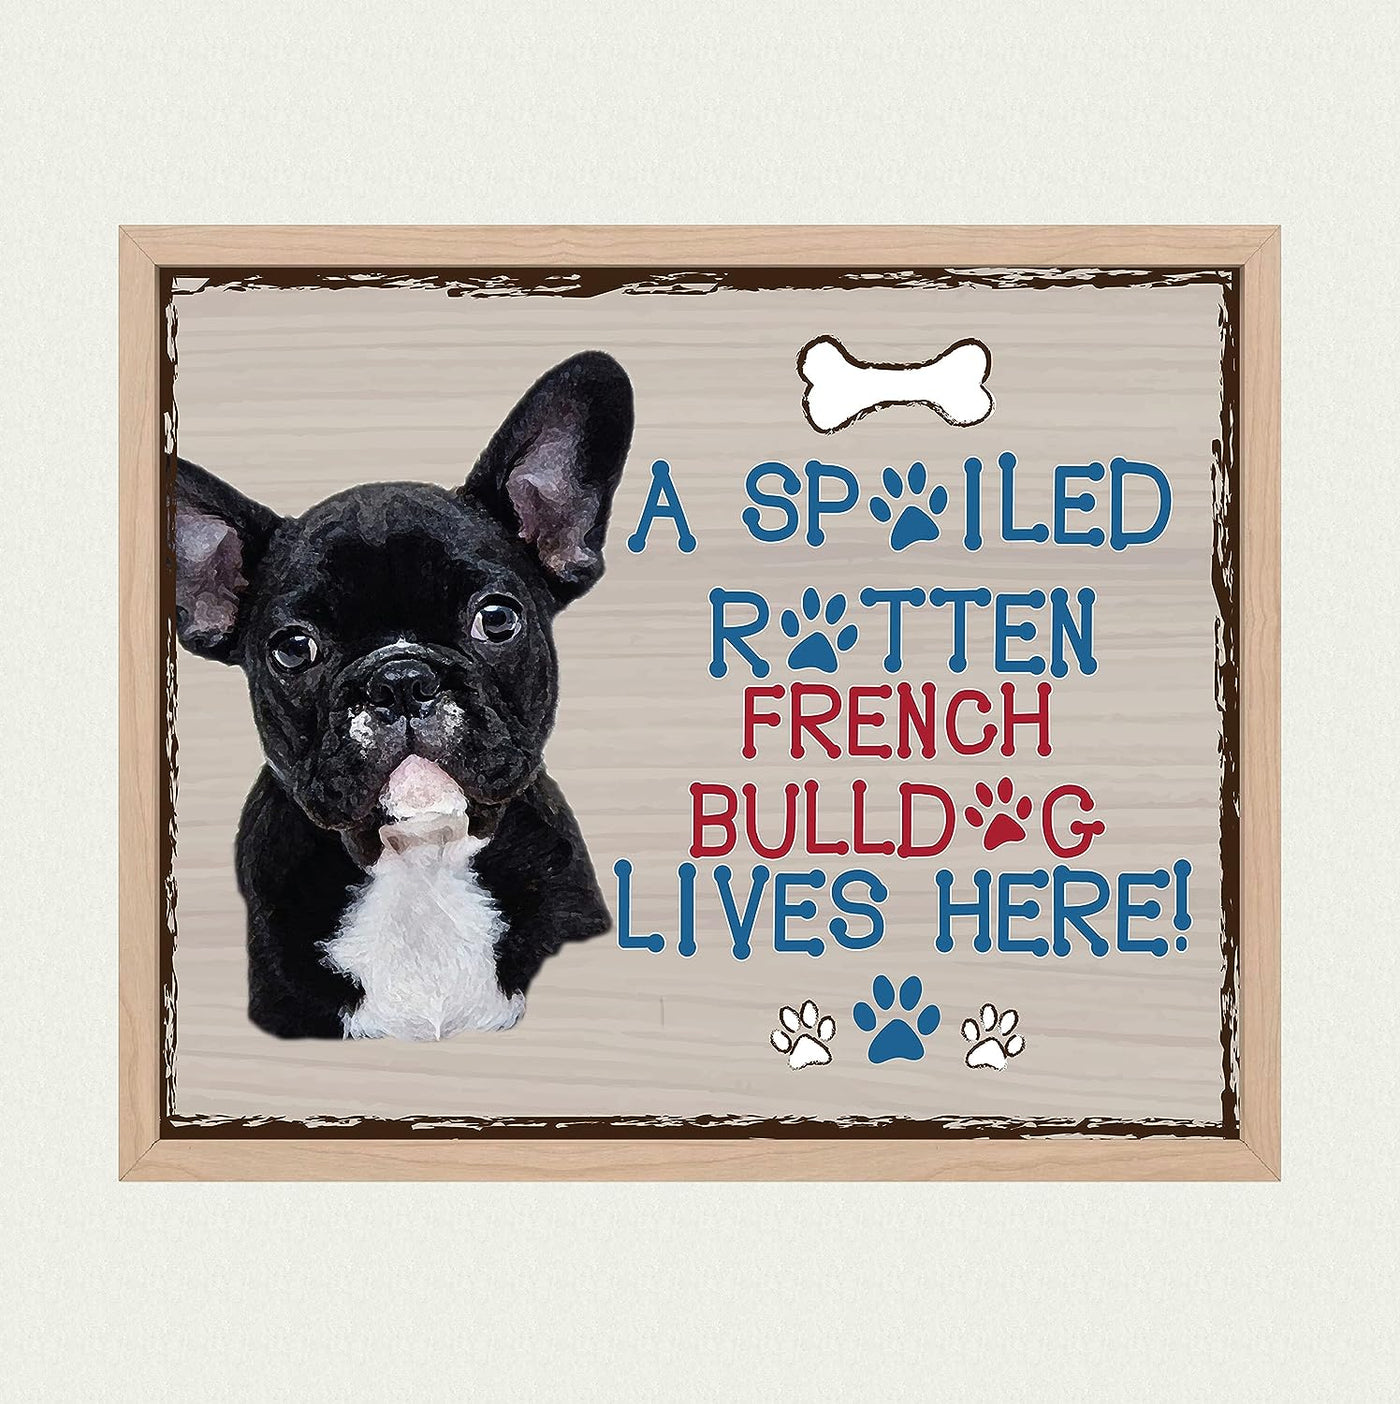 French Bulldog-Dog Poster Print-10 x 8" Wall Decor Sign-Ready To Frame."A Spoiled Rotten French Bulldog Lives Here". Perfect Pet Wall Art for Home-Kitchen-Cave-Garage. Great Gift for Frenchie Fans!